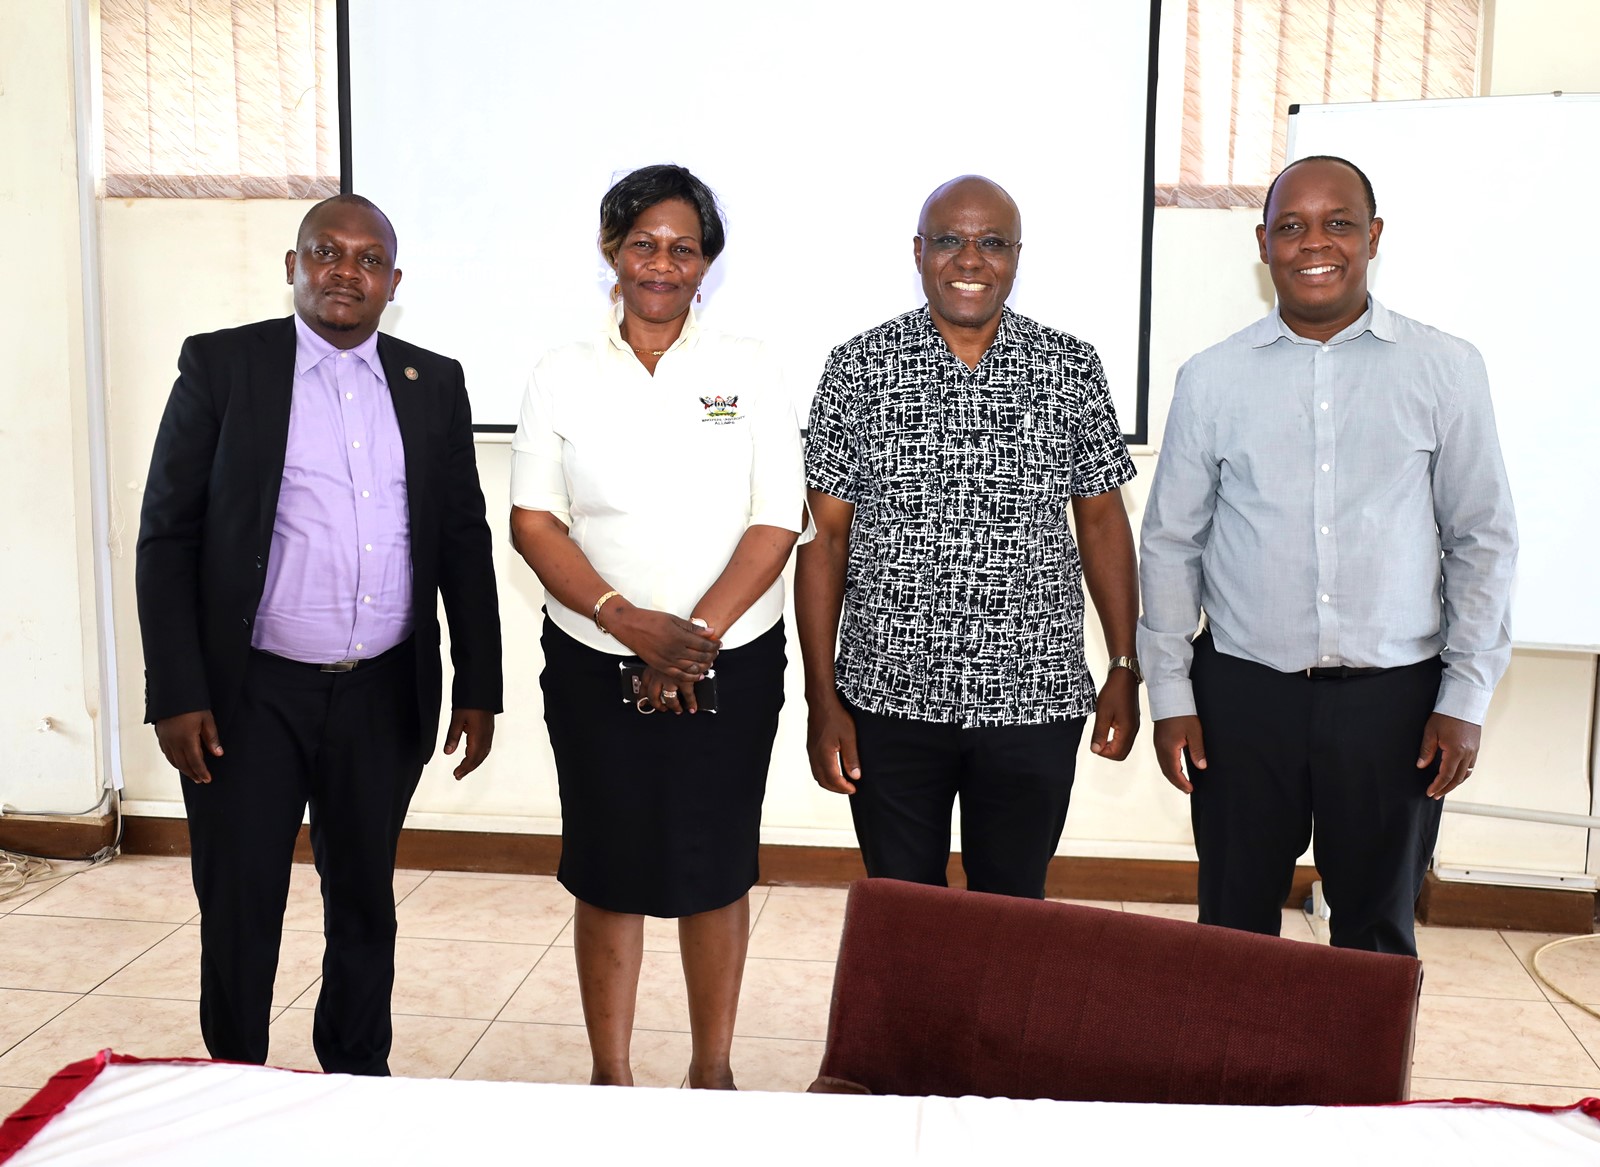 Left to Right Mr. Peter Eneru, Dr. Joyce Bukirwa Muwanguzi, Canon Goddy Muhumuza and Dr. Peter Nabende in group photo after the meeting on 20th October 2023. Conference Hall, Level 4, Block A, College of Computing and Information Sciences (CoCIS), Makerere University, Kampala Uganda, East Africa.